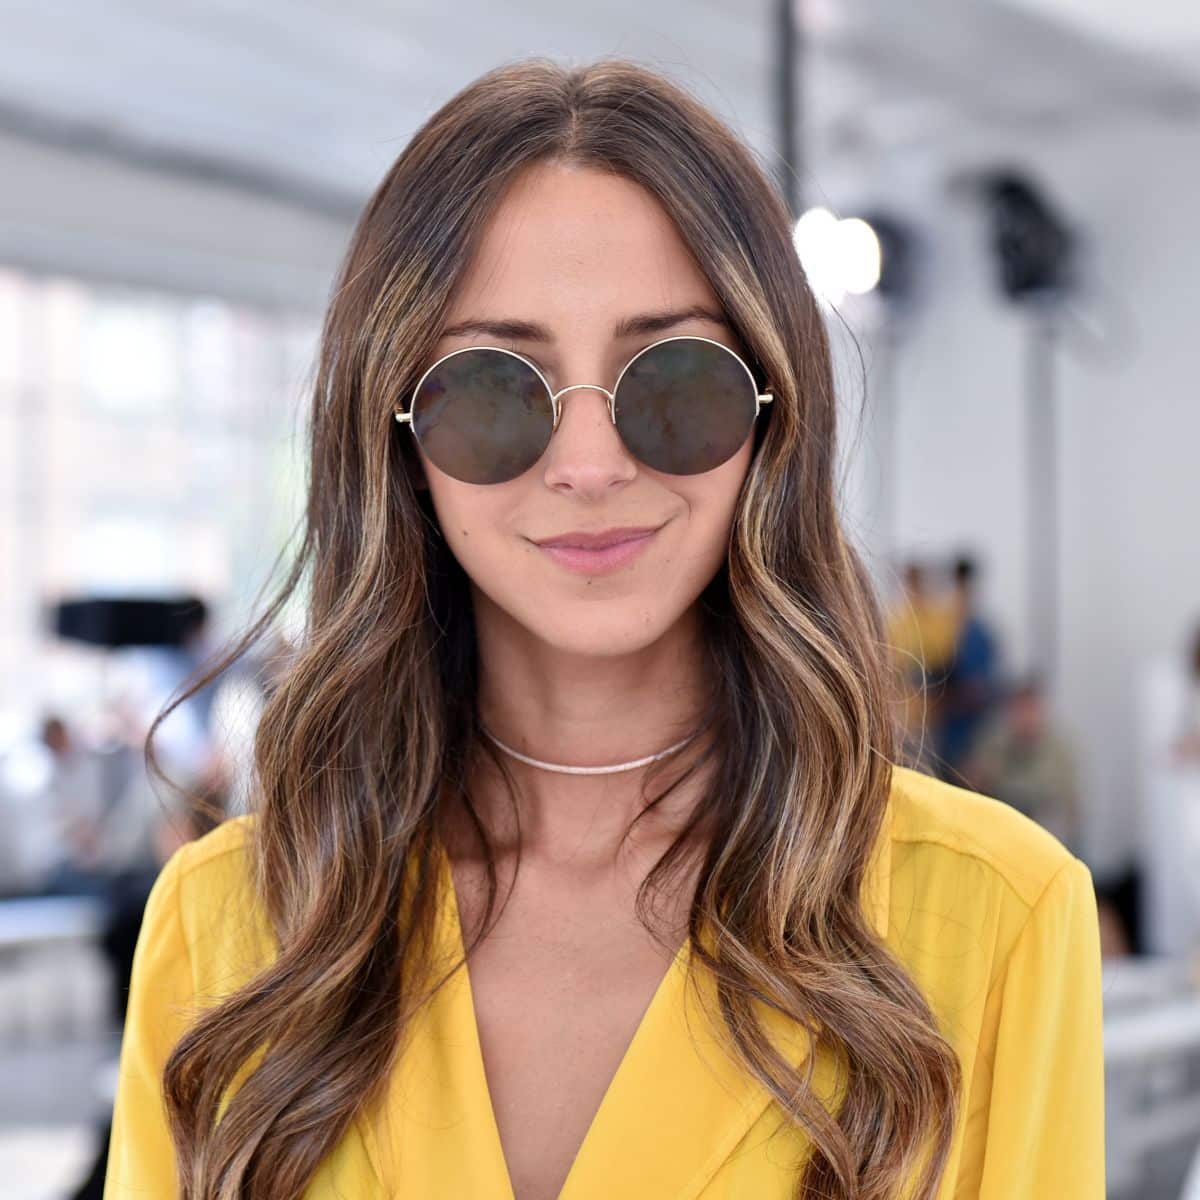 What is the net worth of Arielle Charnas